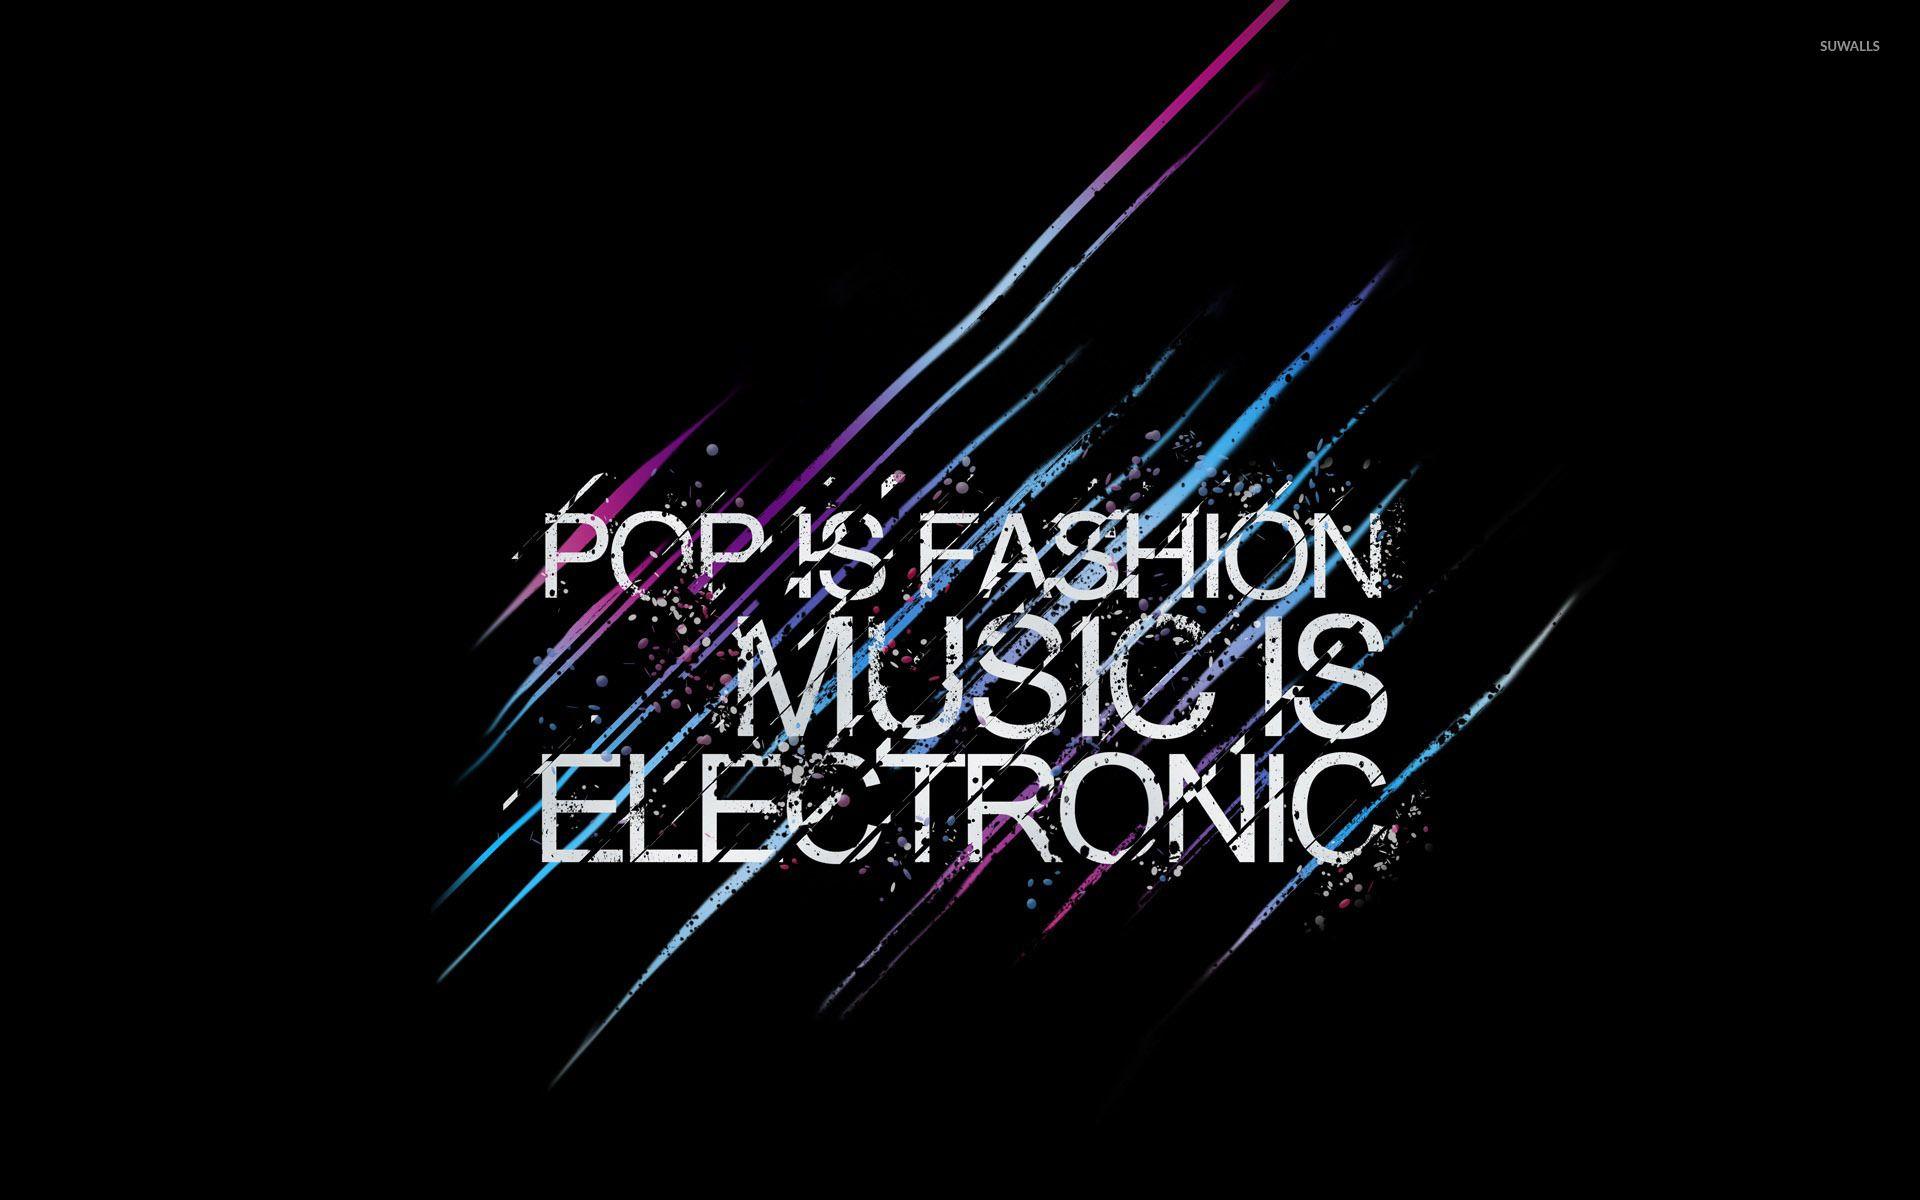 Pop is fashion wallpapers